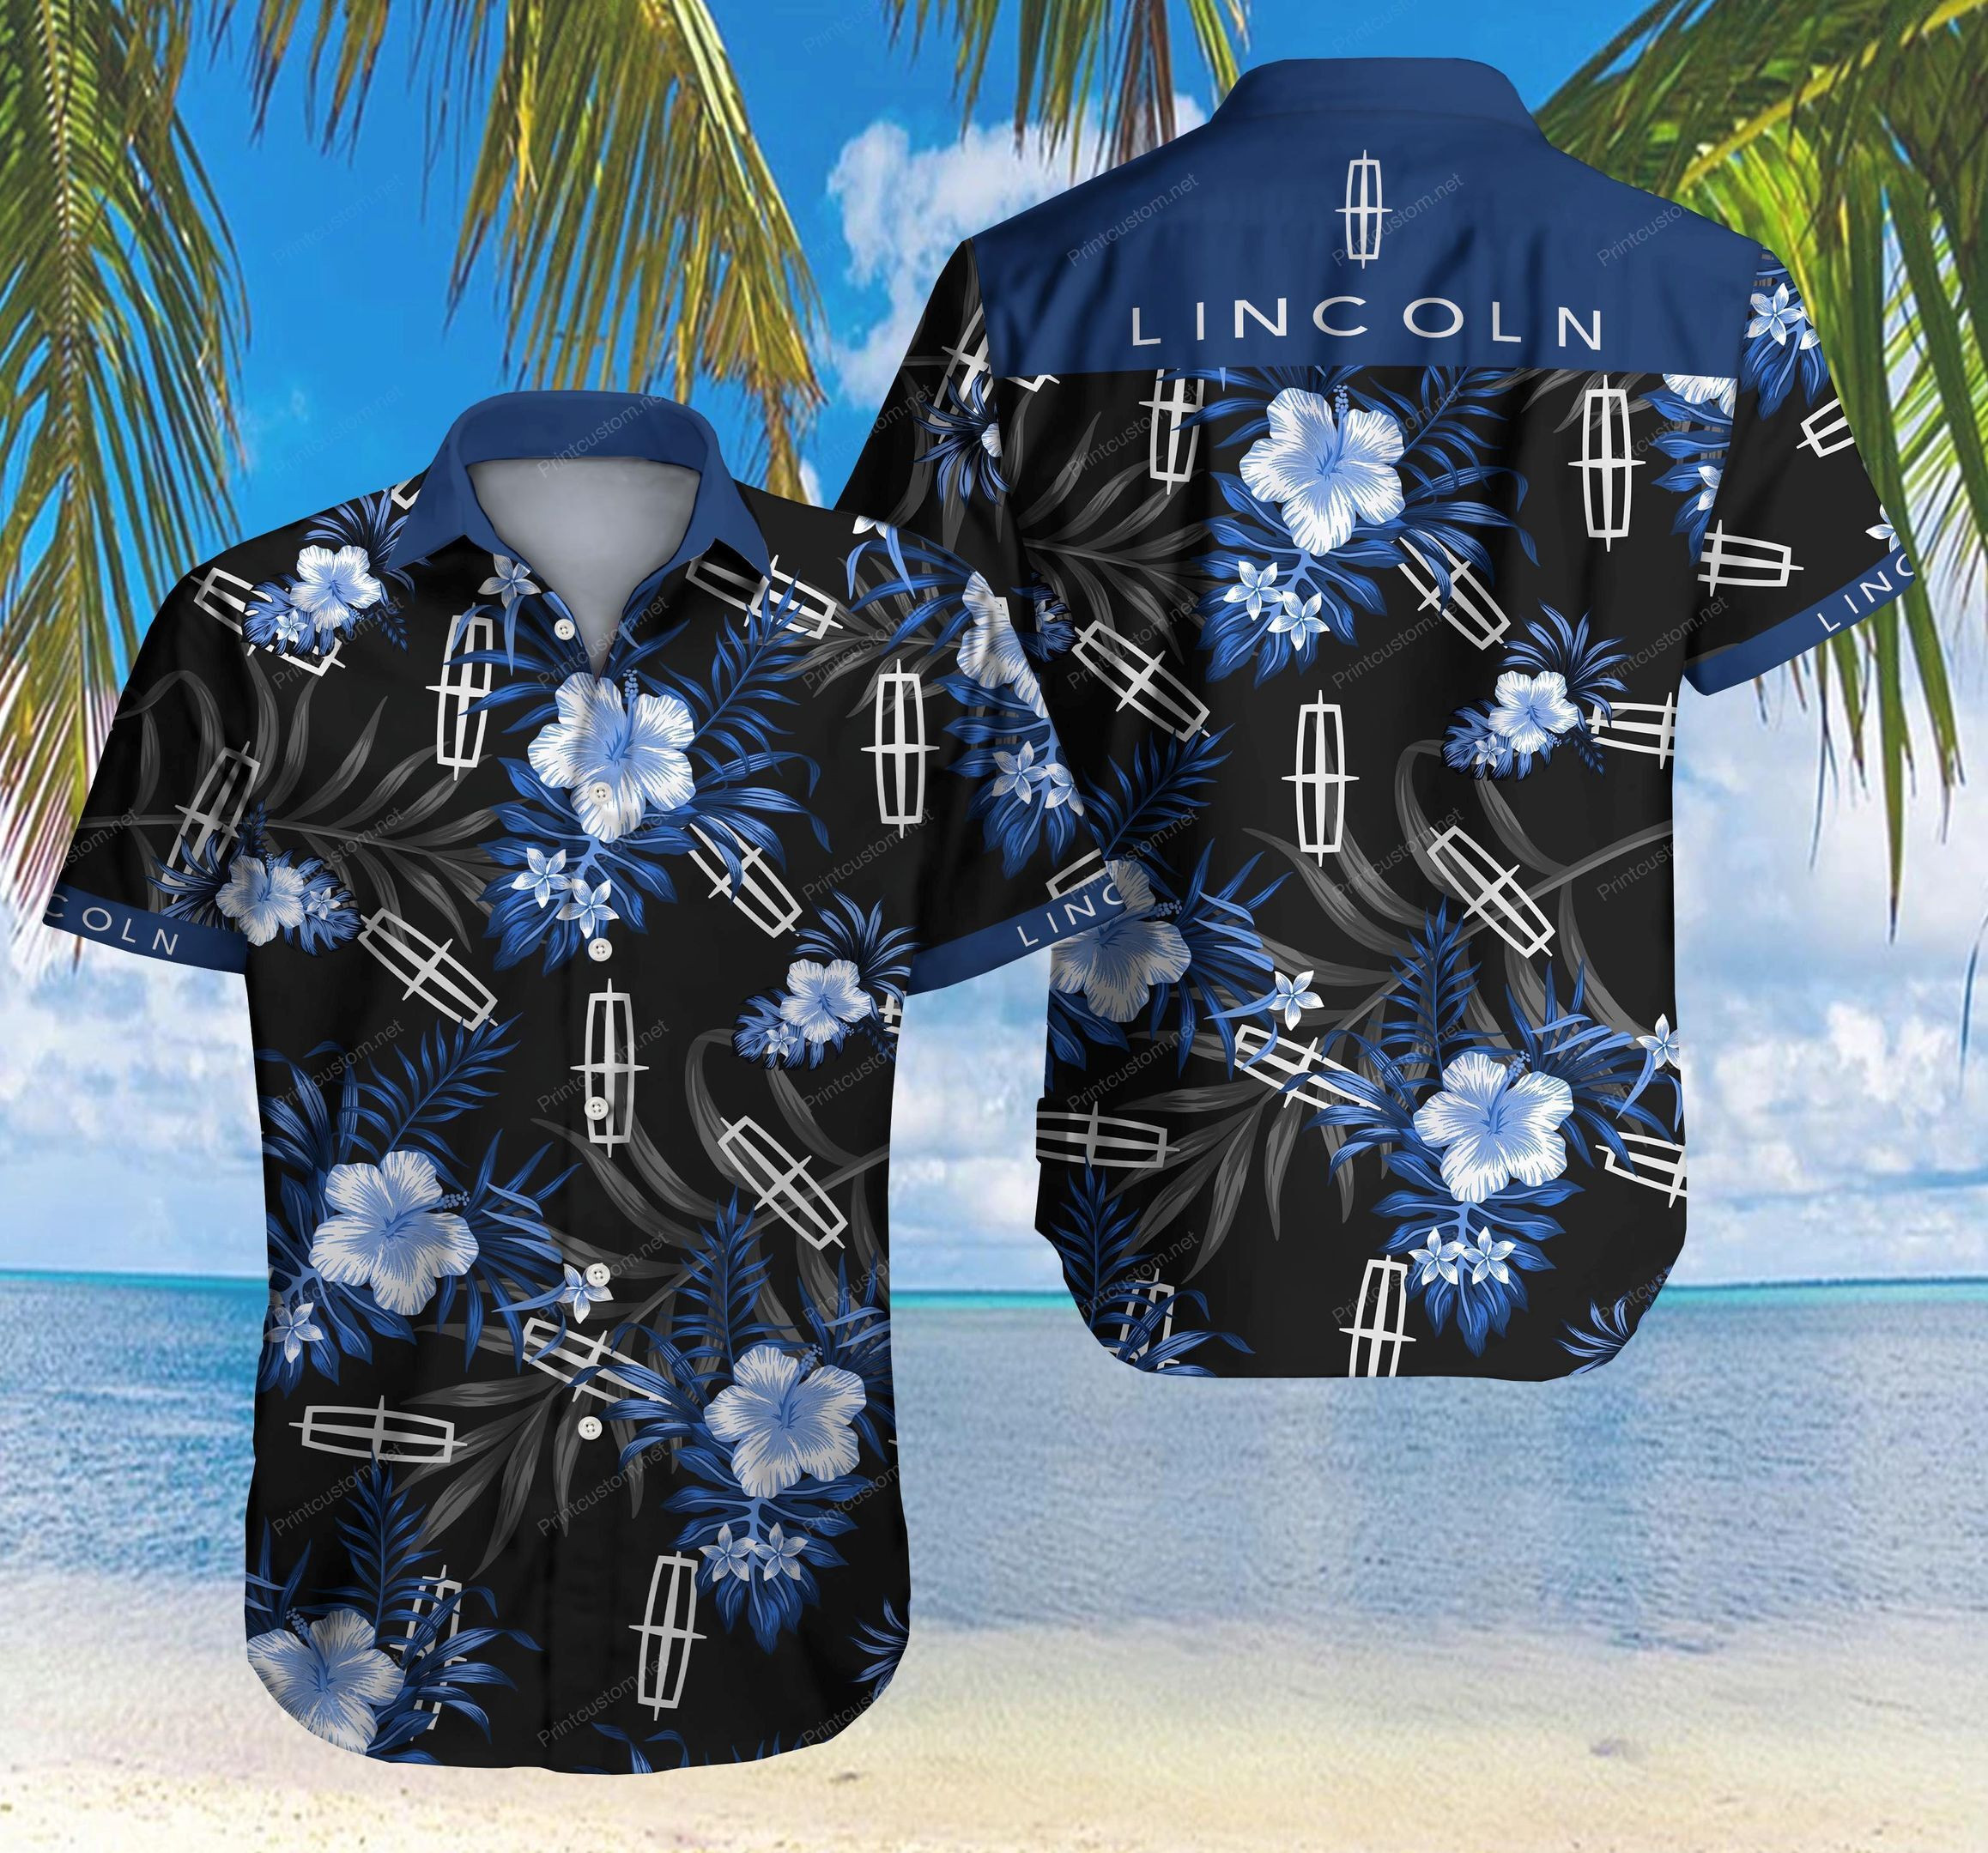 Choose from the many styles and colors to find your favorite Hawaiian Shirt below 46